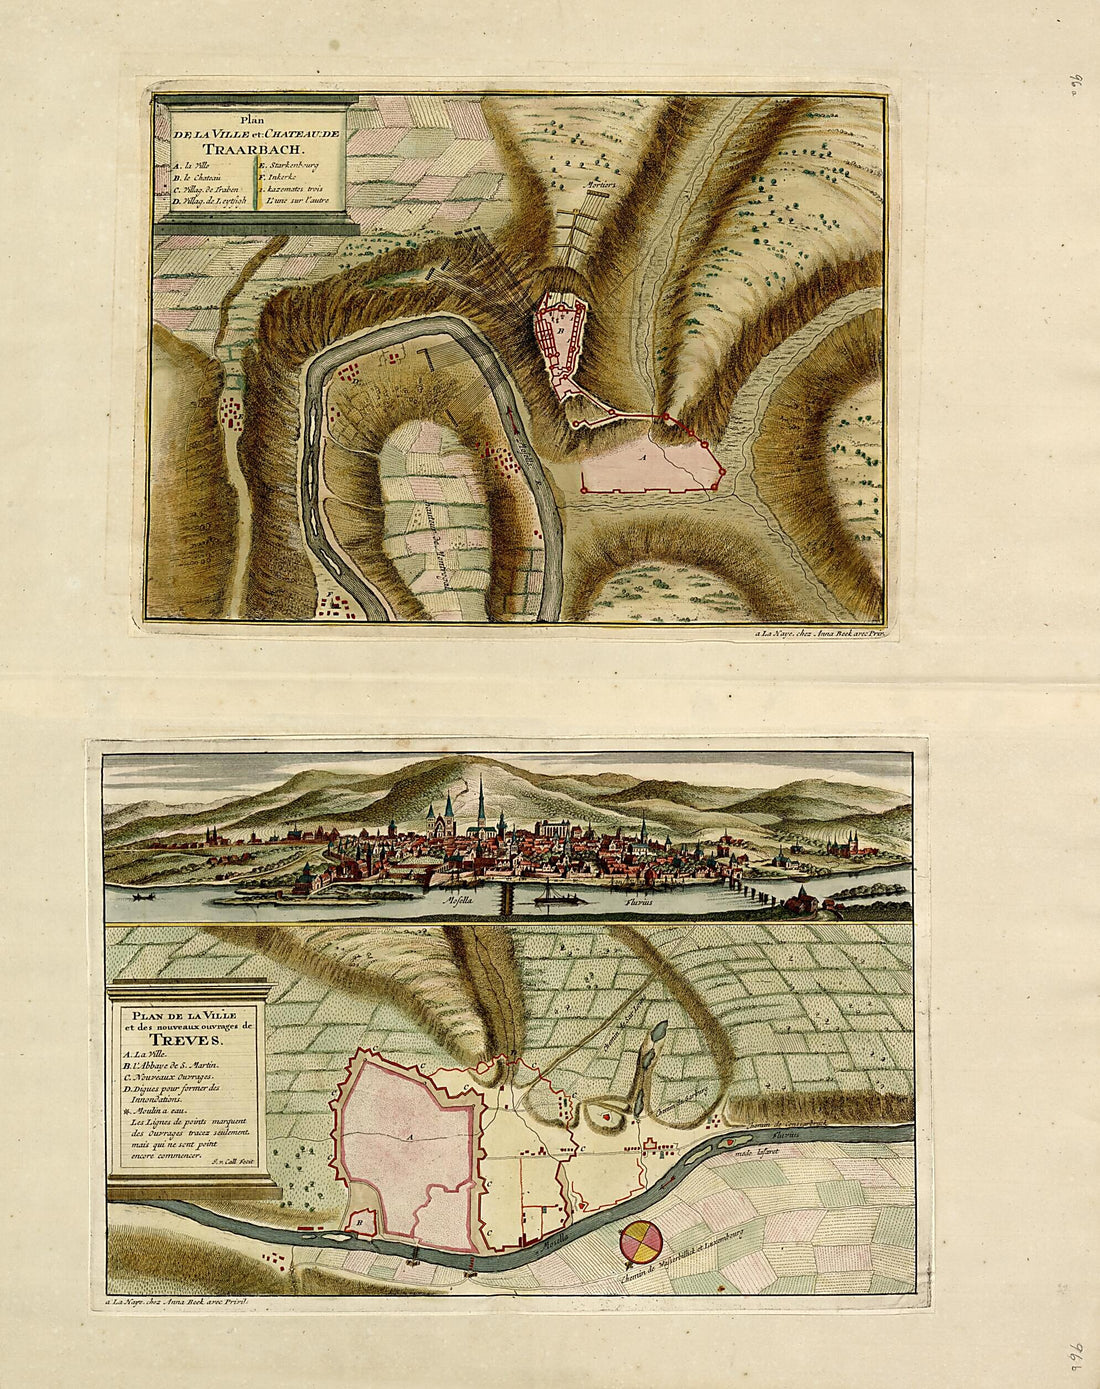 This old map of Plan De La Ville Et Chateau De Traarbach; Plan De La Ville...de Treves from a Collection of Plans of Fortifications and Battles, 1684-from 1709 from 1709 was created by Anna Beeck in 1709